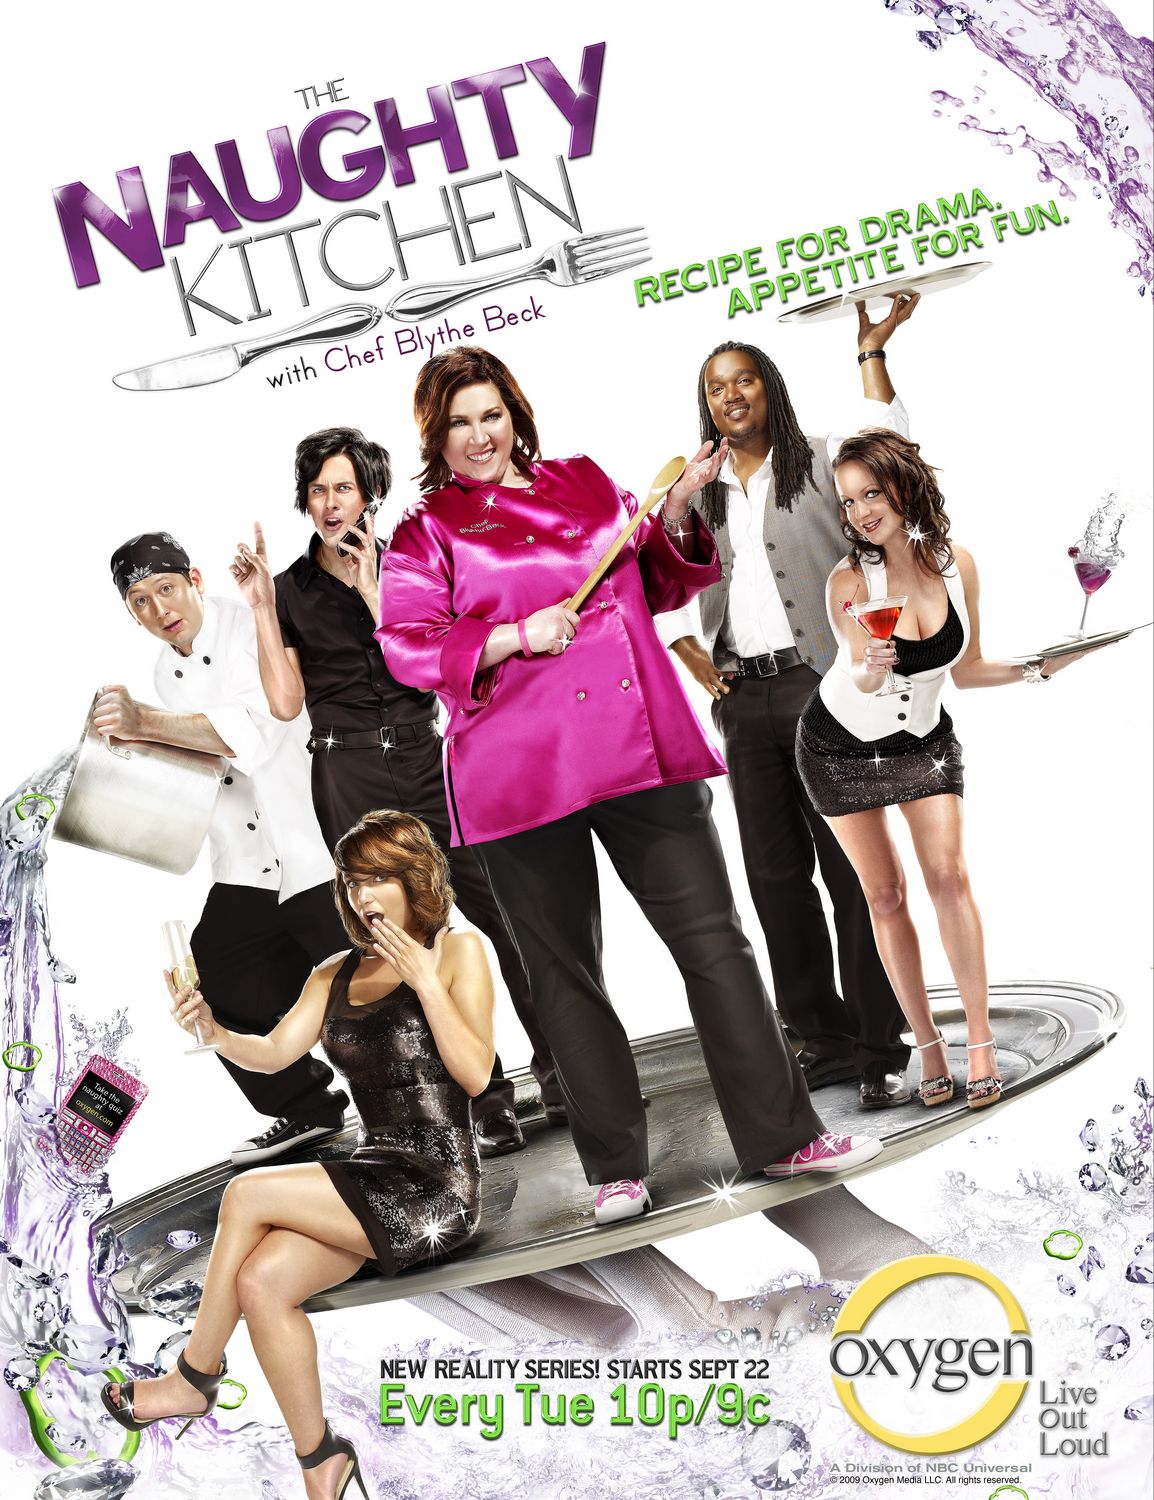 Extra Large TV Poster Image for The Naughty Kitchen with Chef Blythe Beck 